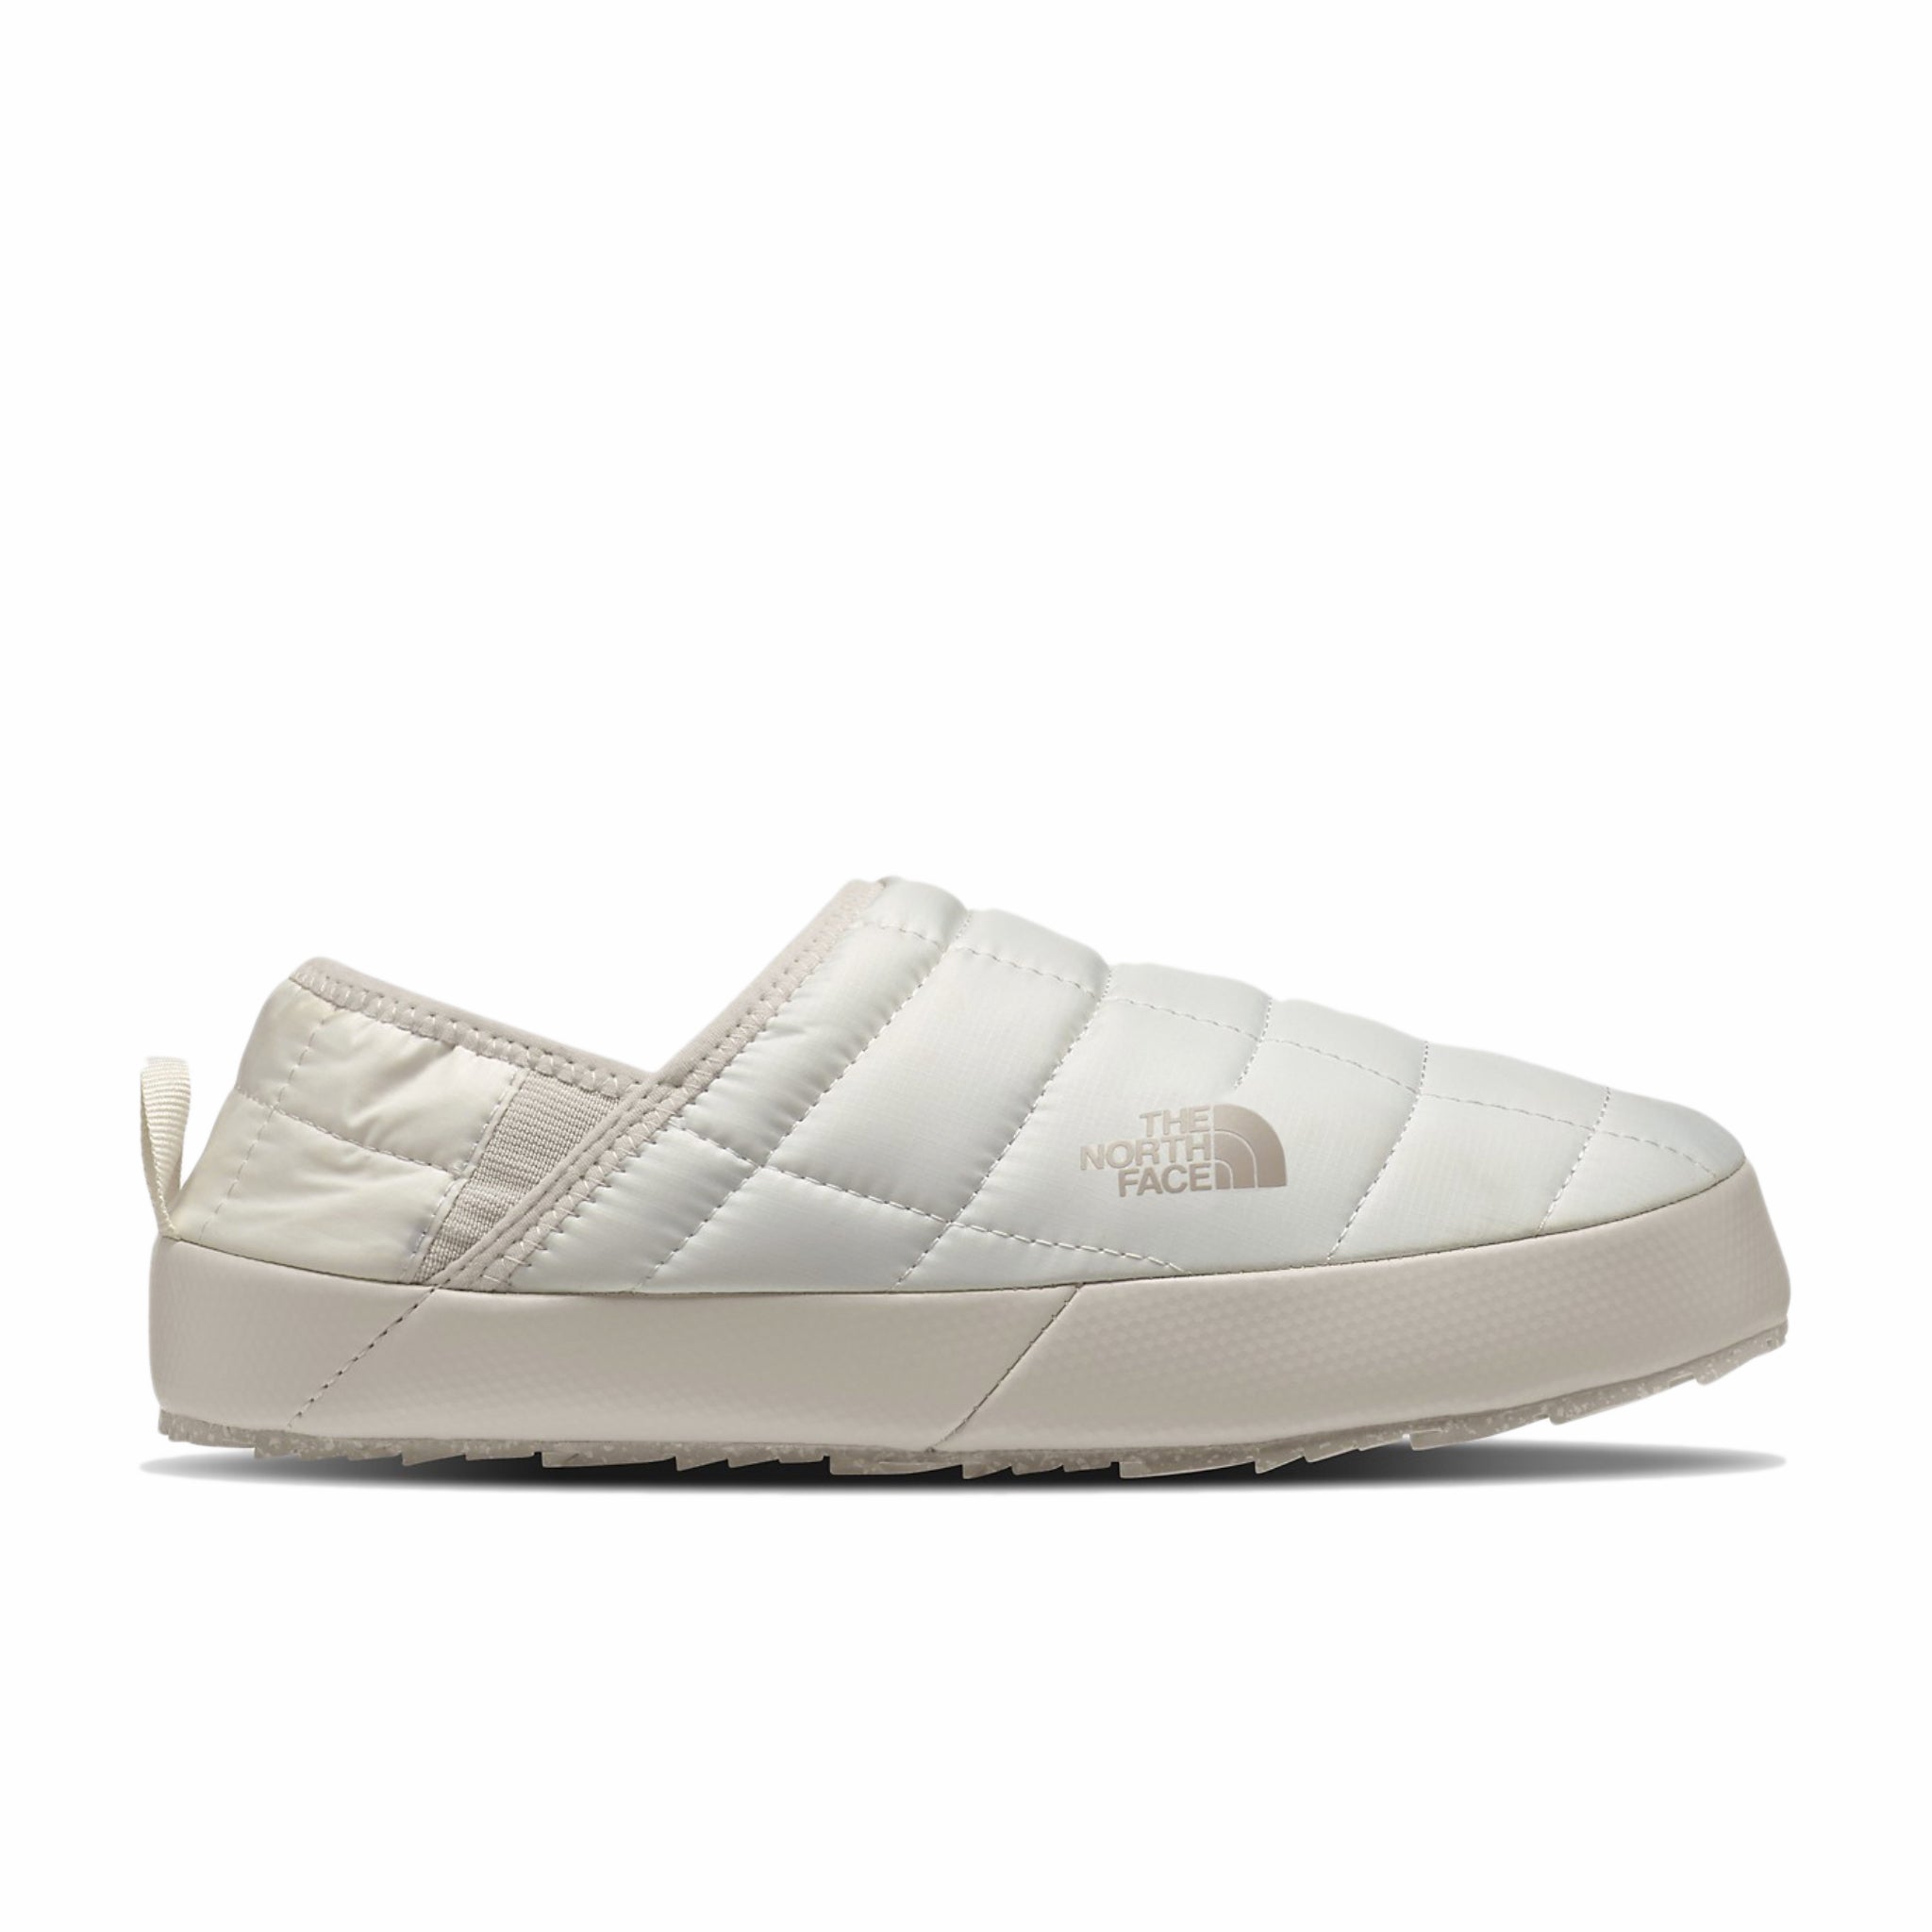 The North Face Women’s Thermoball Traction Mule V (Gardenia White/Silver Grey) - August Shop